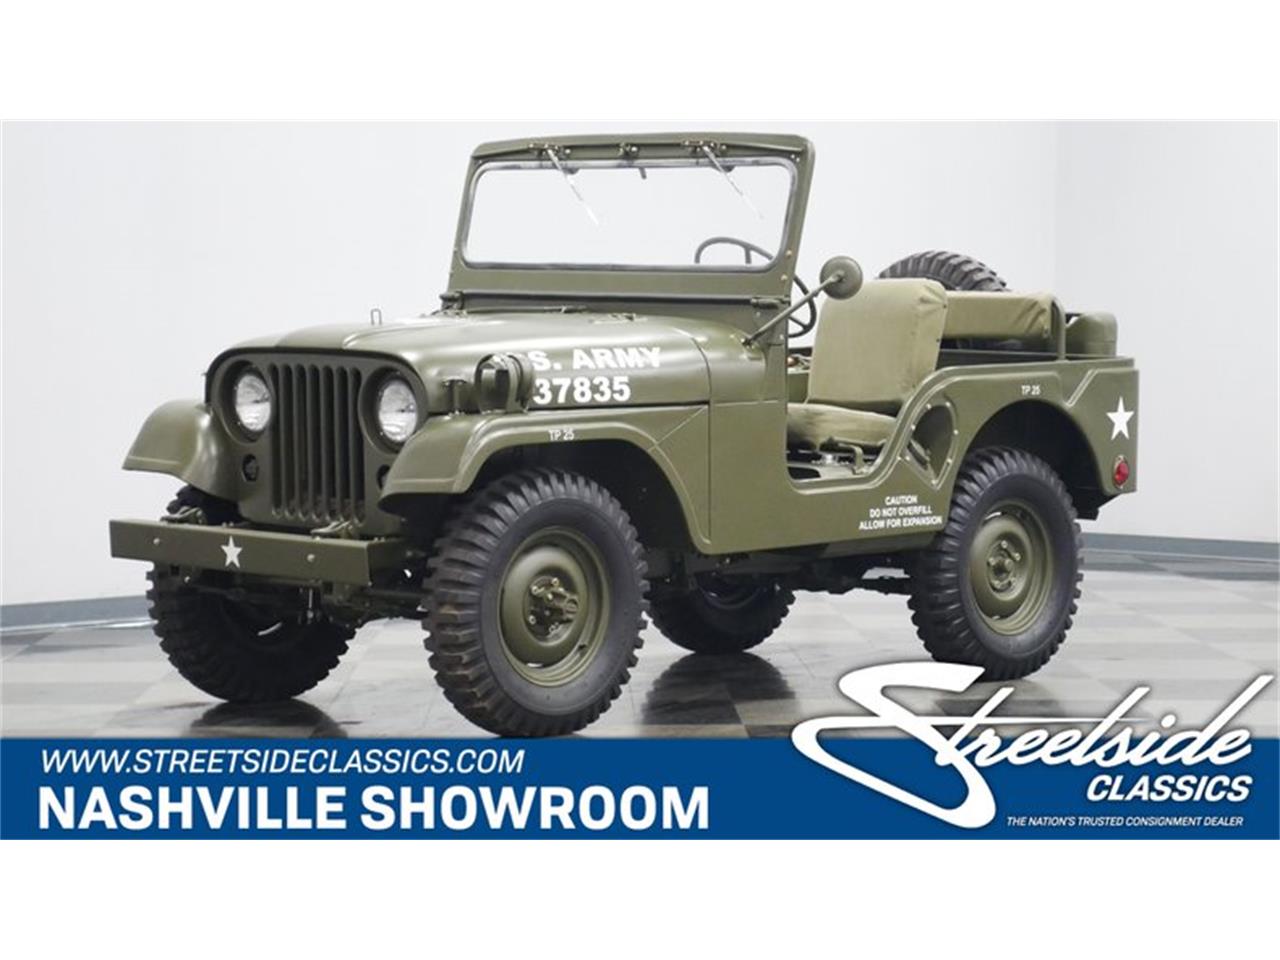 1952 Willys Jeep for sale in Lavergne, TN